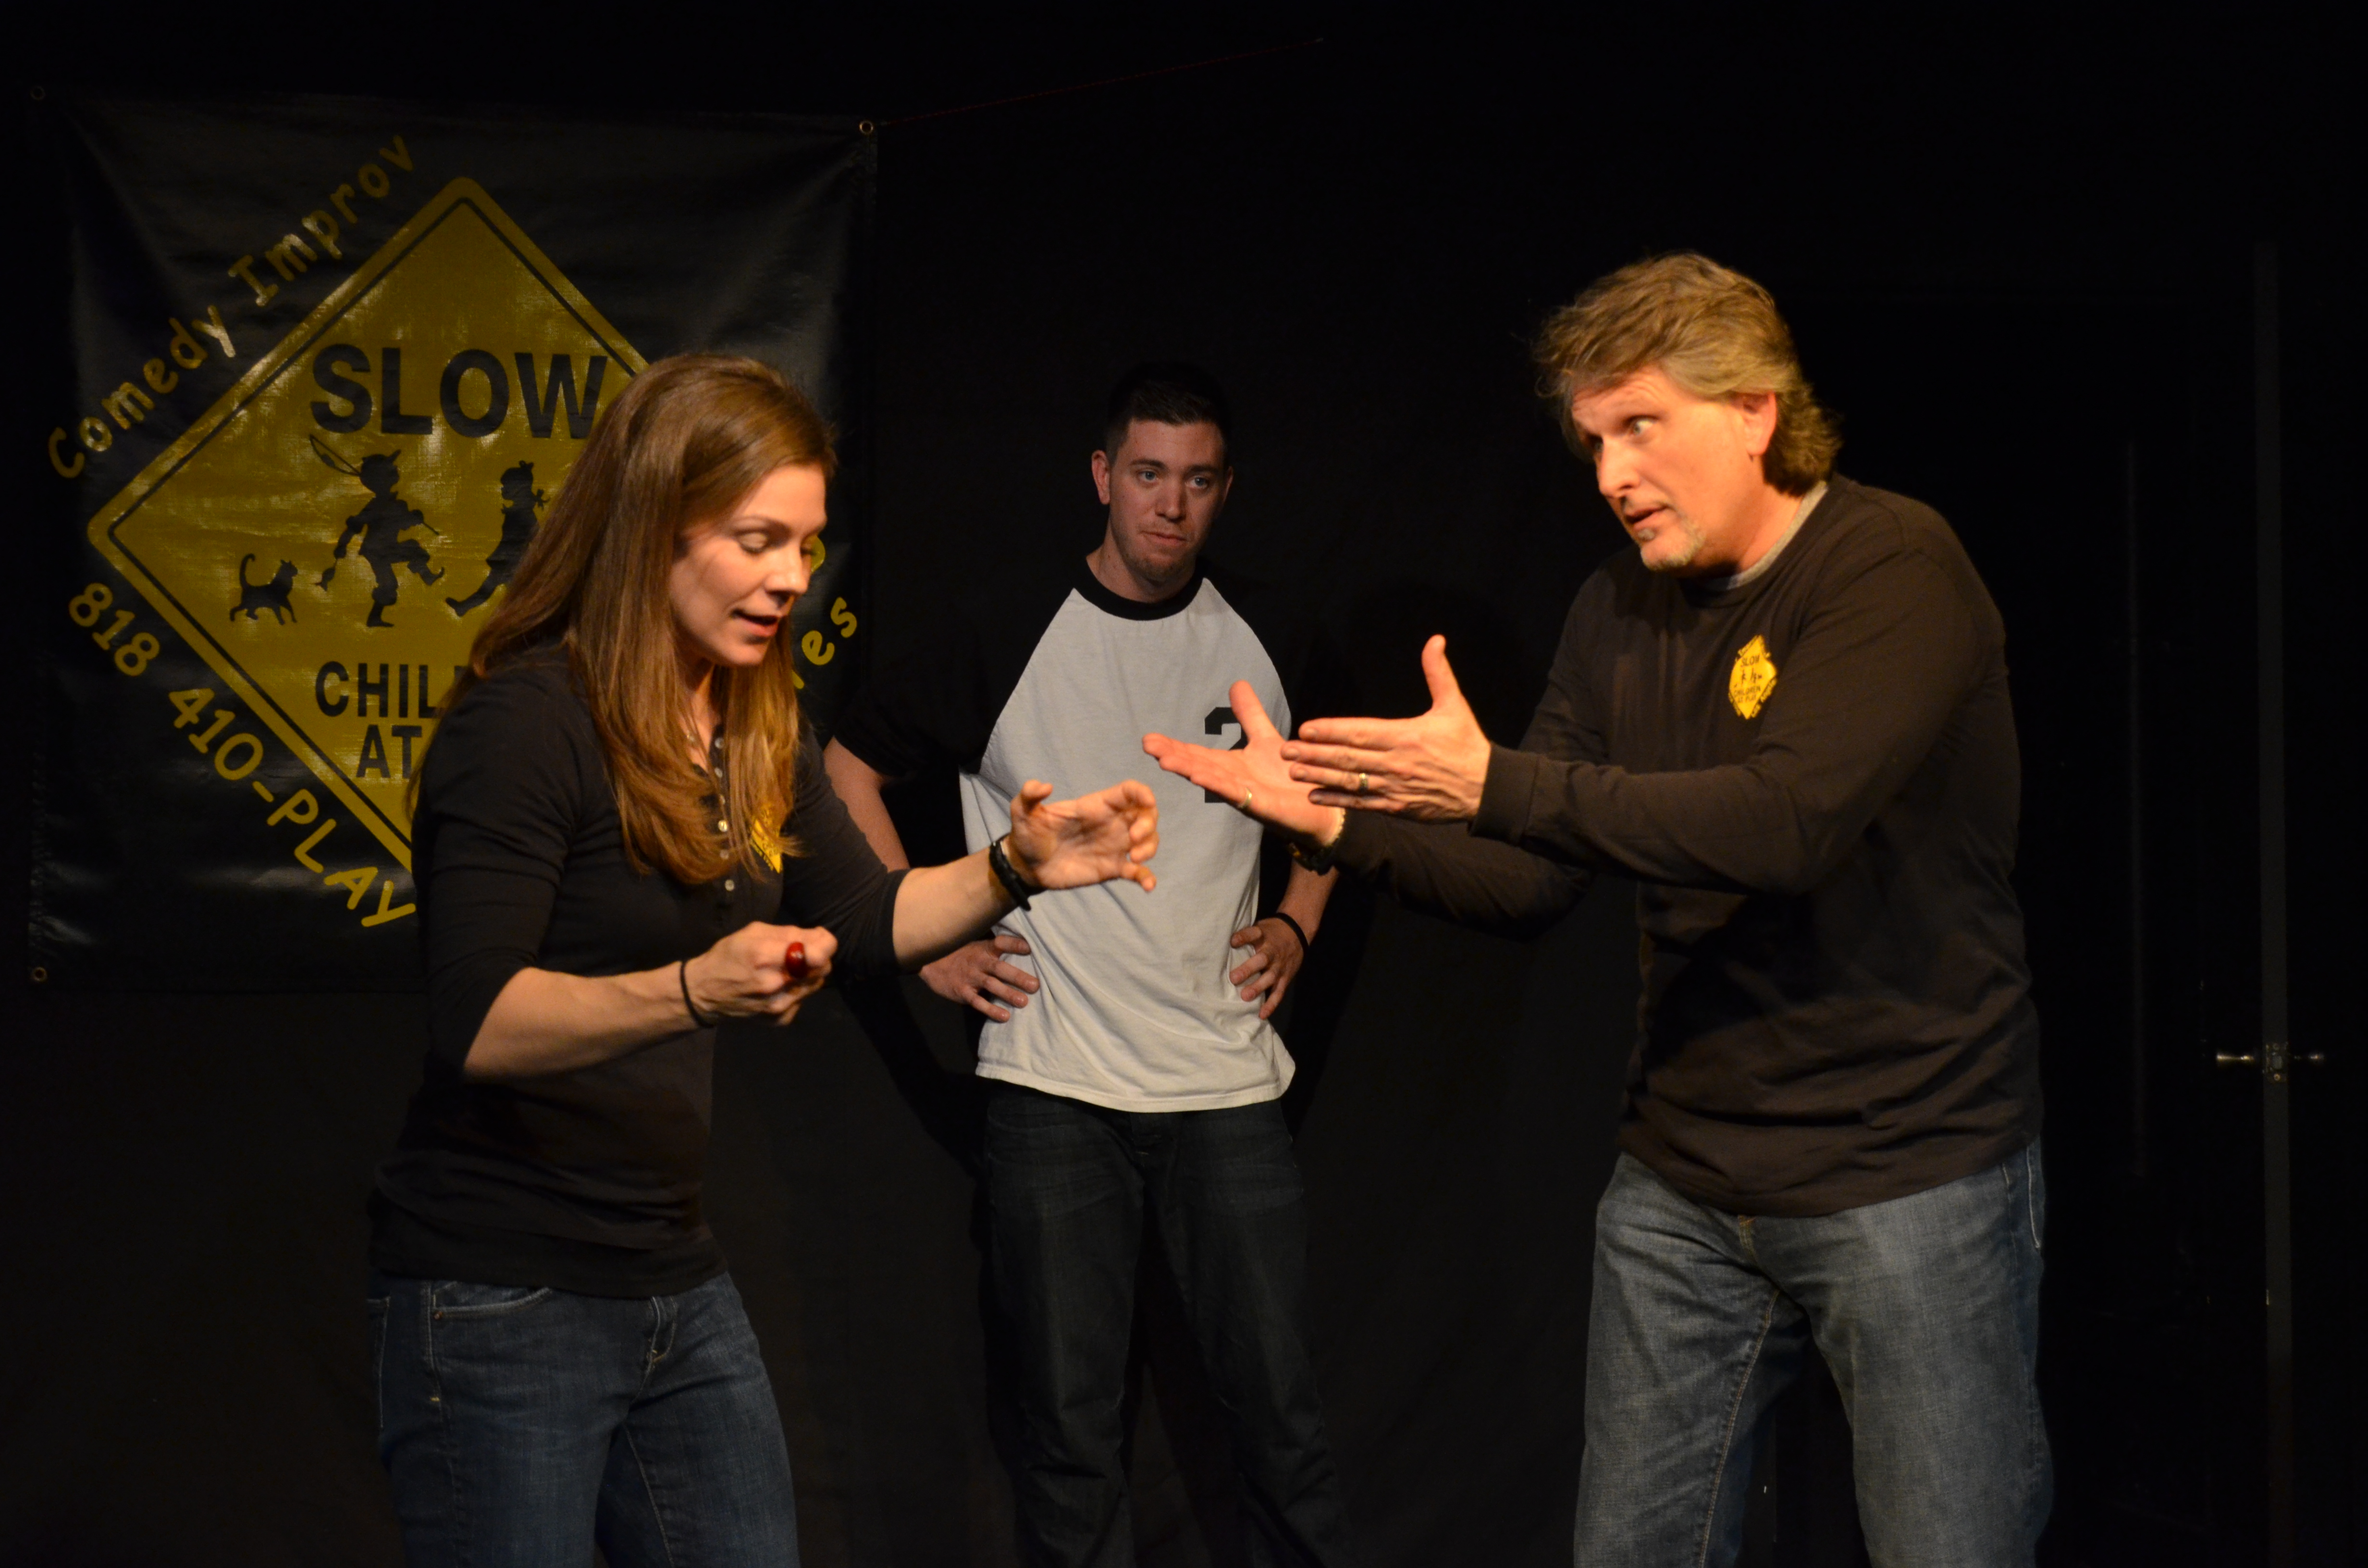 Tim Simek performing comedy improv with Slow...Children at Play [14th Season] in North Hollywood. (April 2012)